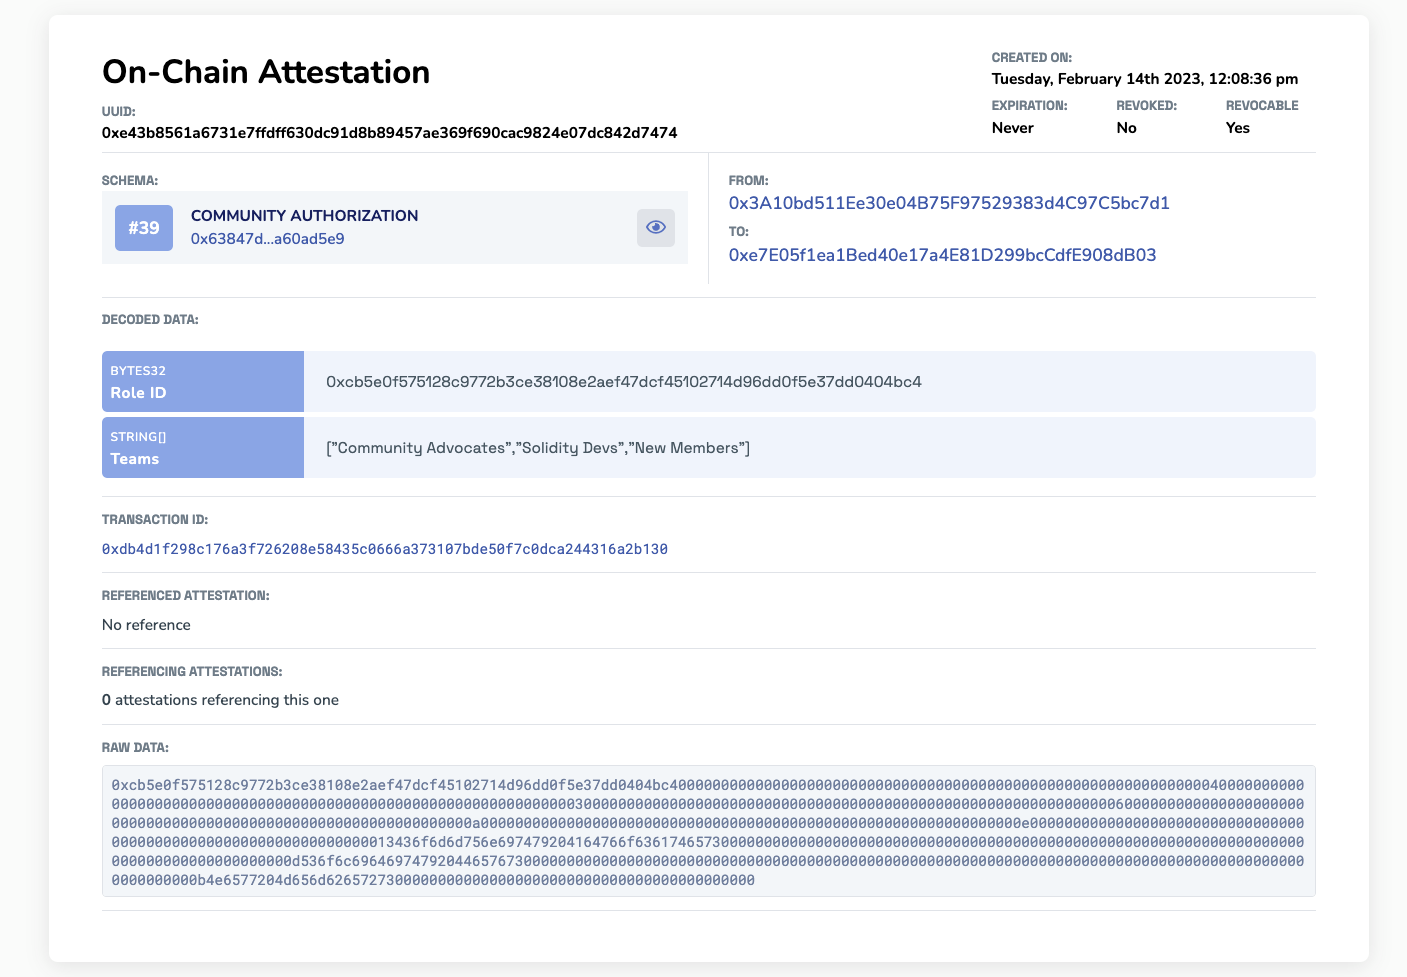 Example on-chain attestation of a DAO granting authorizations for Alice to join the community.